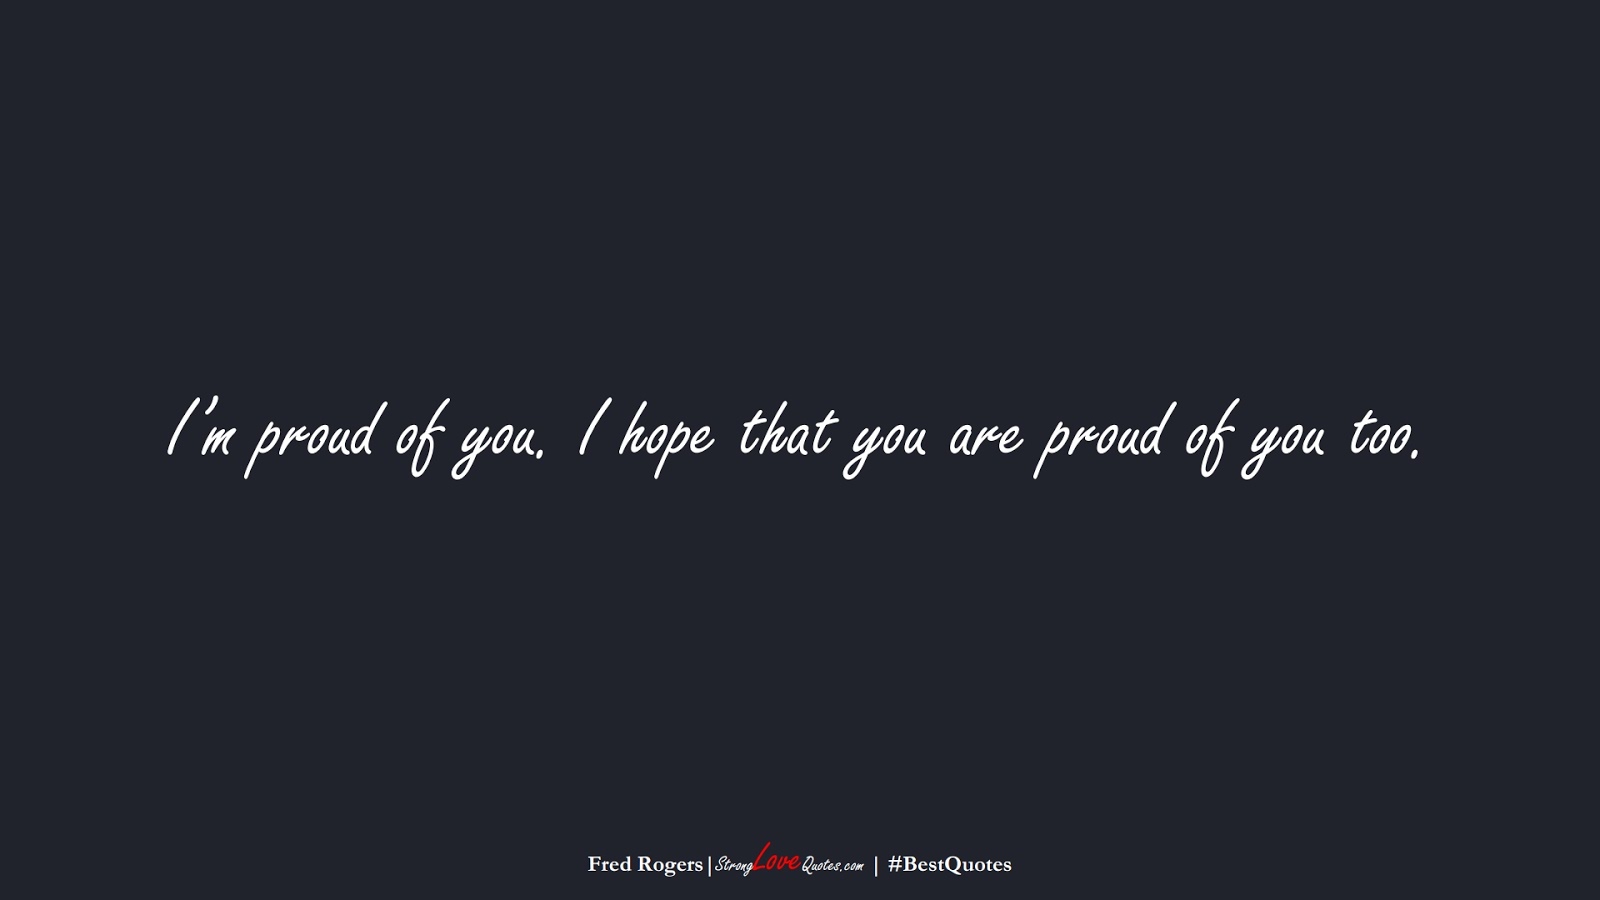 I’m proud of you. I hope that you are proud of you too. (Fred Rogers);  #BestQuotes